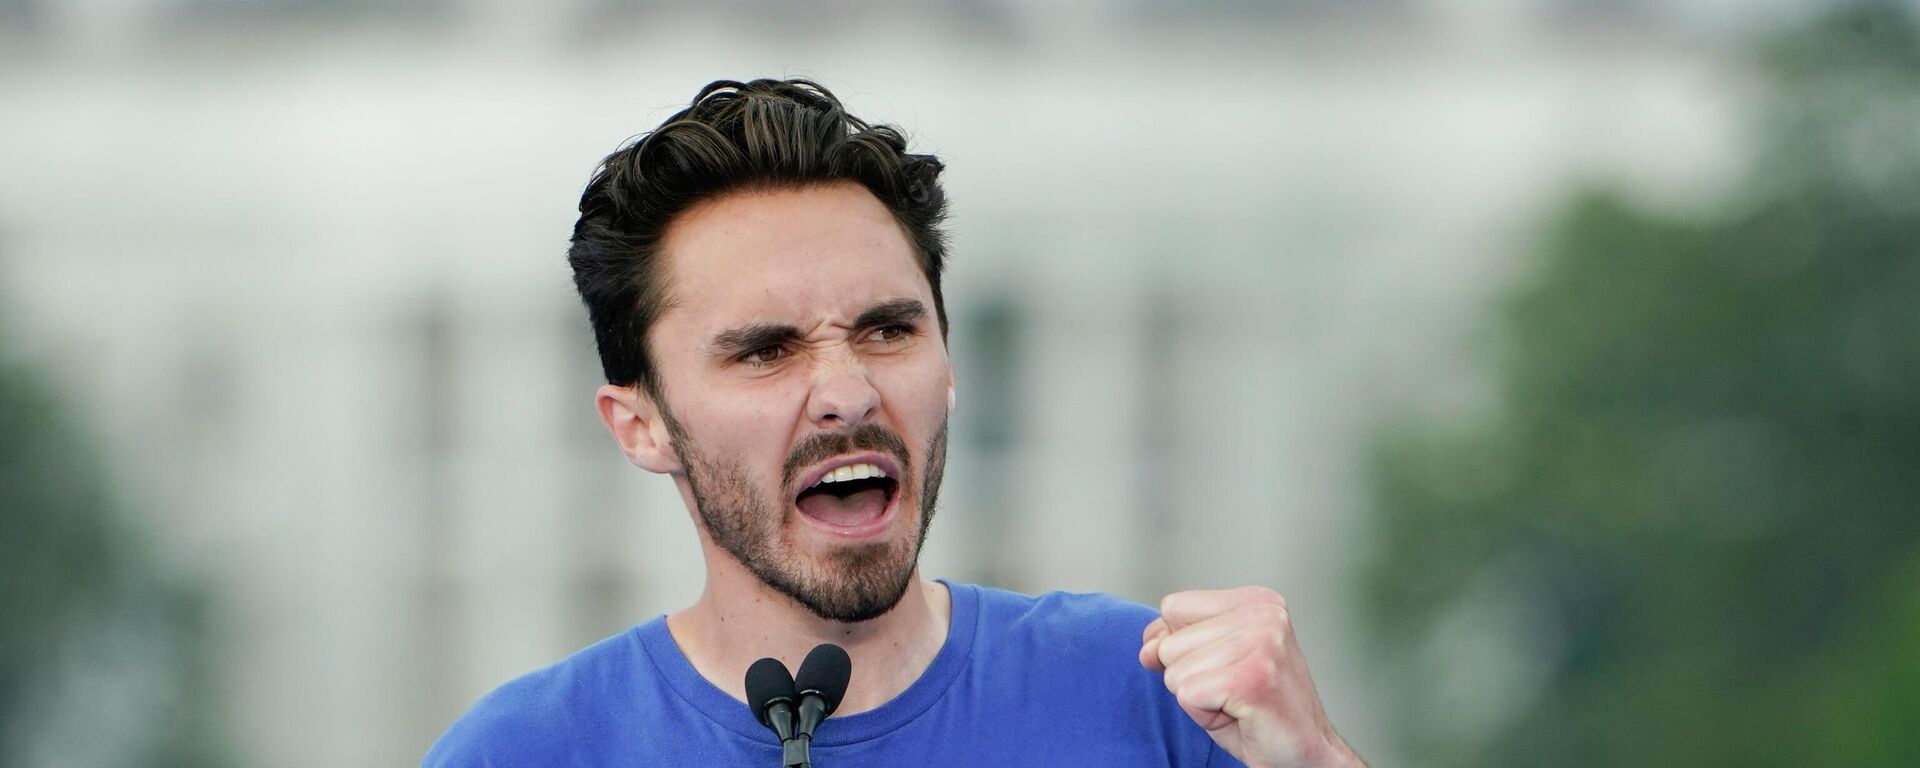 Parkland survivor and activist David Hogg speaks to the crowd during in the second March for Our Lives rally in support of gun control on Saturday, June 11, 2022, in Washington. The rally is a successor to the 2018 march organized by student protestors after the 2018 mass shooting at Marjory Stoneman Douglas High School in Parkland, Fla. - Sputnik International, 1920, 20.07.2022